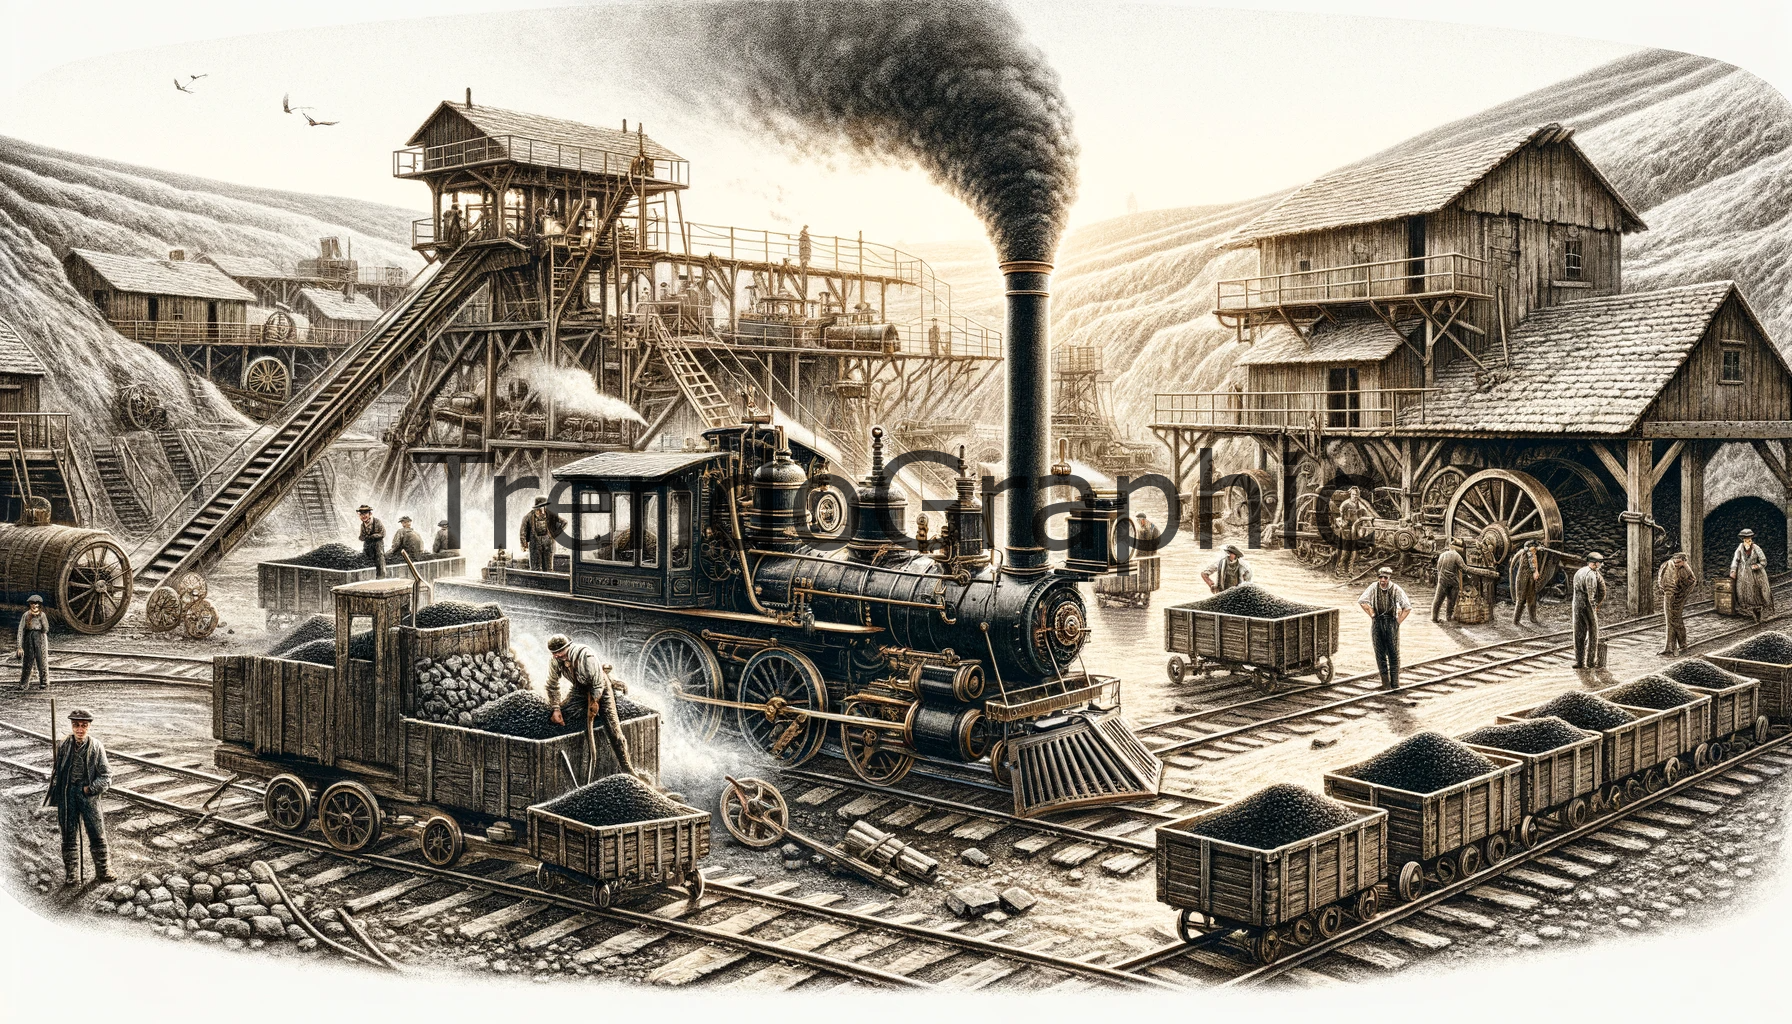 Capturing the Essence of 1800s Industry – The Old-Fashioned Coal Mine and Steam Engine